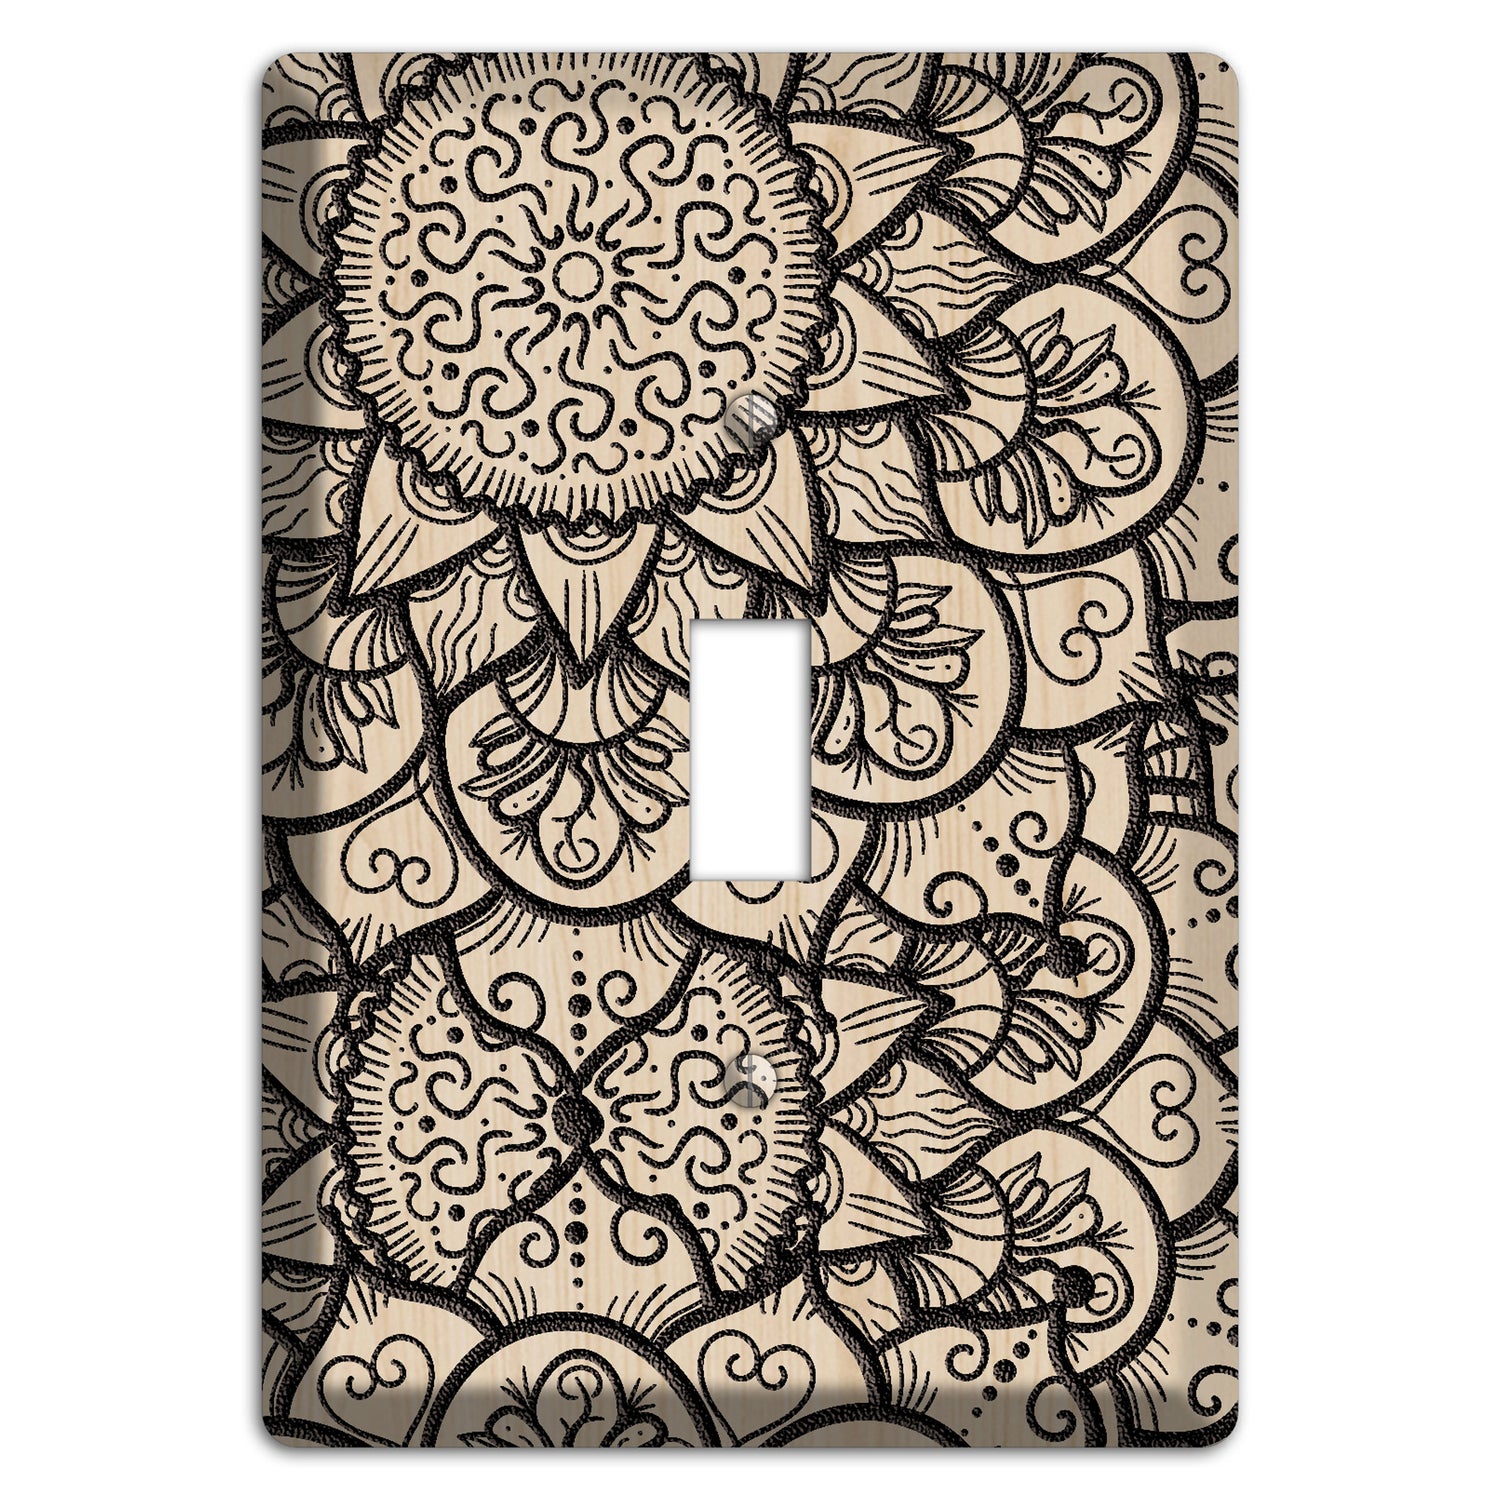 Mandala Black and White Style W Wood Lasered Cover Plates